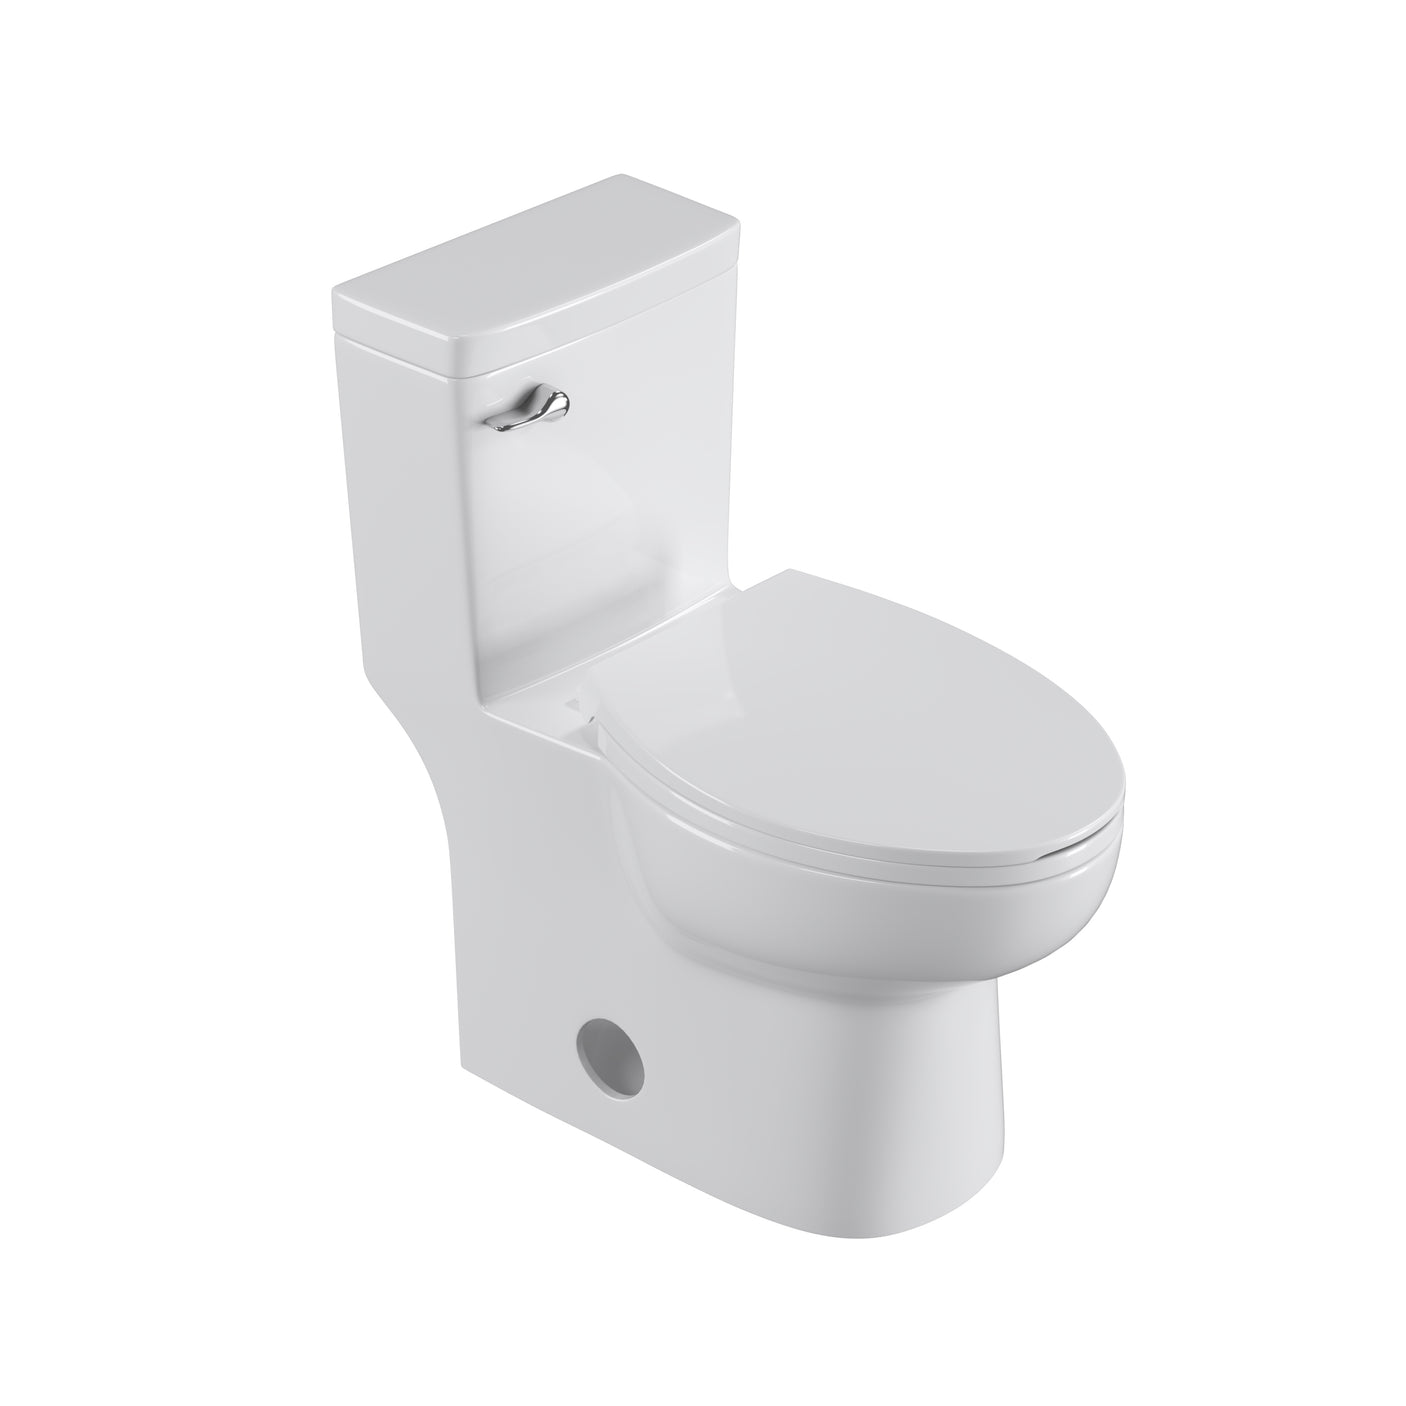 Single Flush Elongated Standard One Piece Toilet with Comfortable Seat Height, Soft Close Seat Cover, High-Efficiency Supply, and White Finish Toilet Bowl (White Toilet)